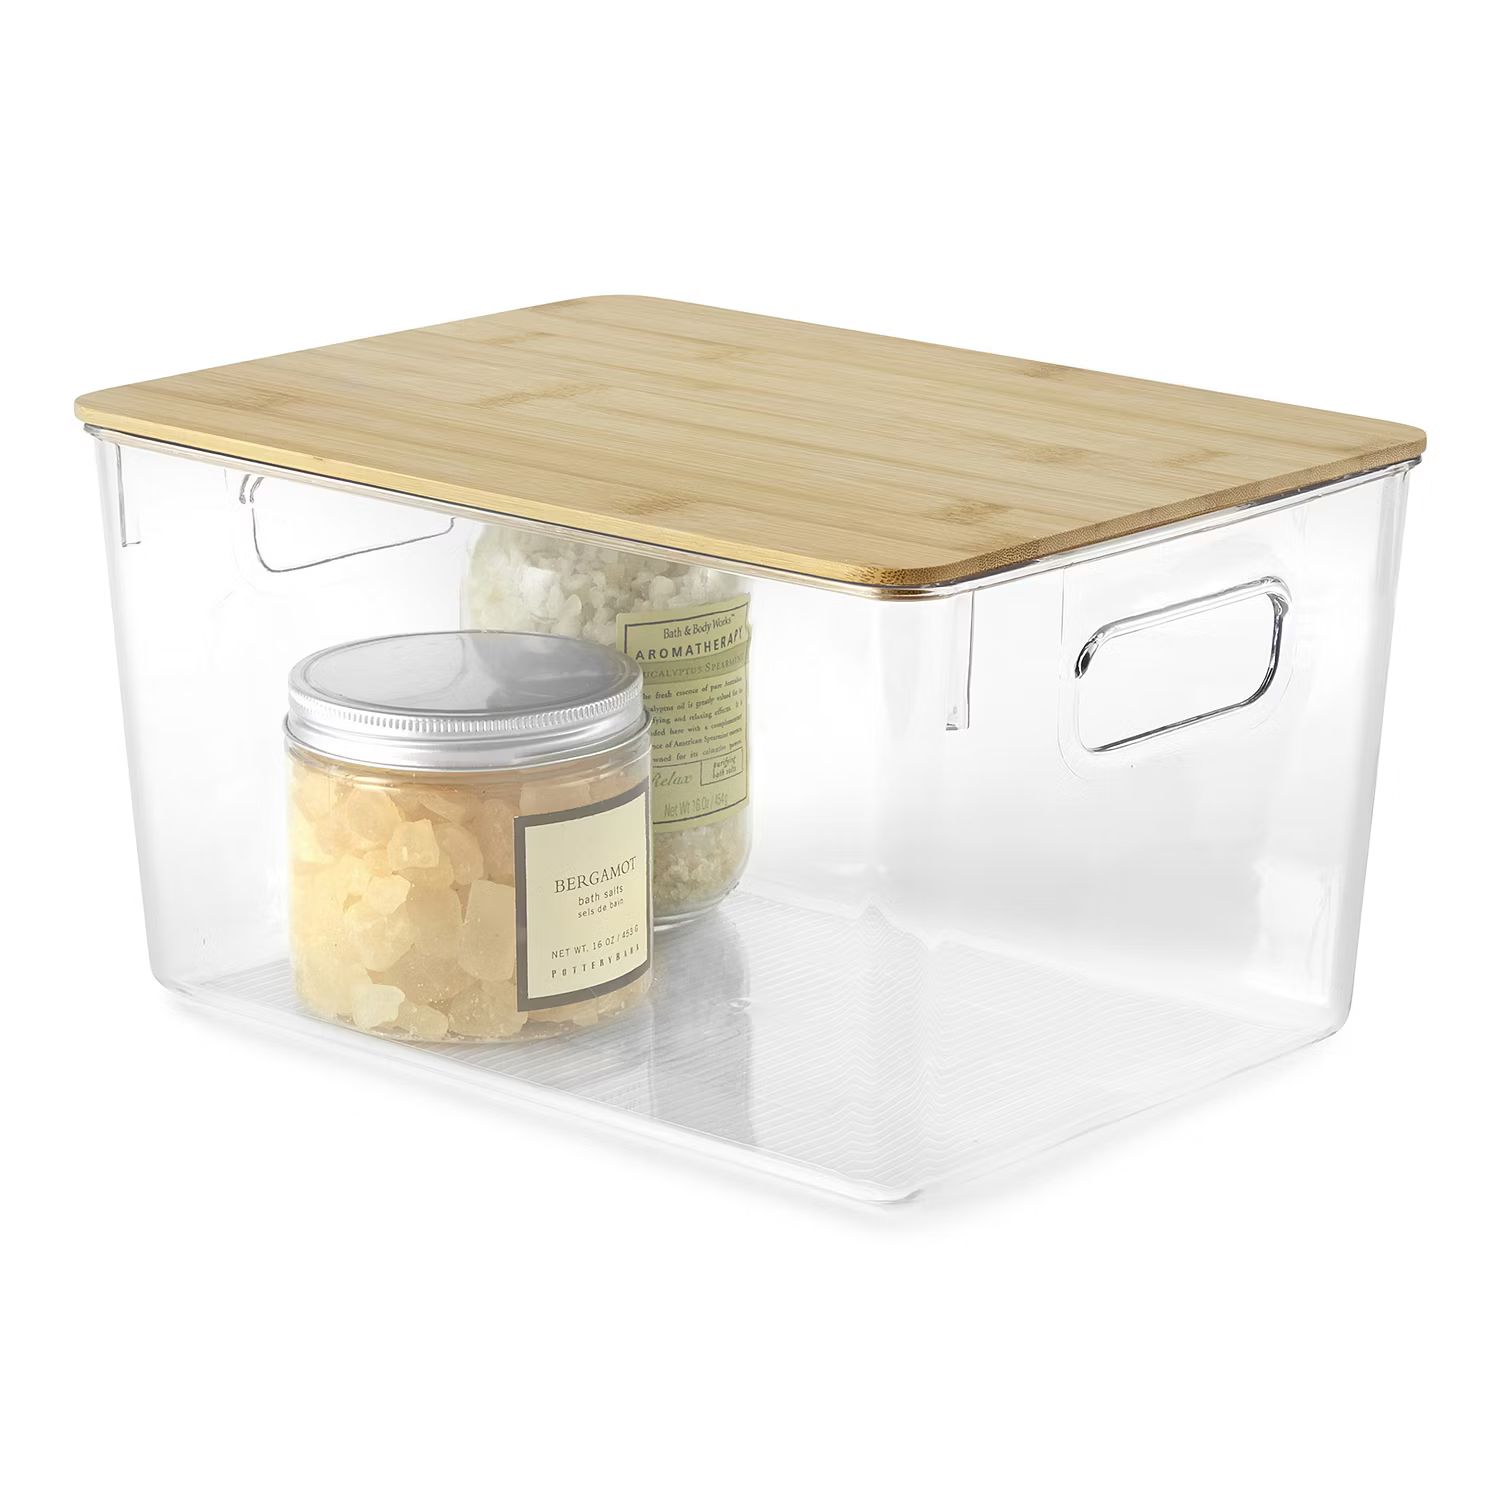 Home Expressions Large Storage Bin | JCPenney